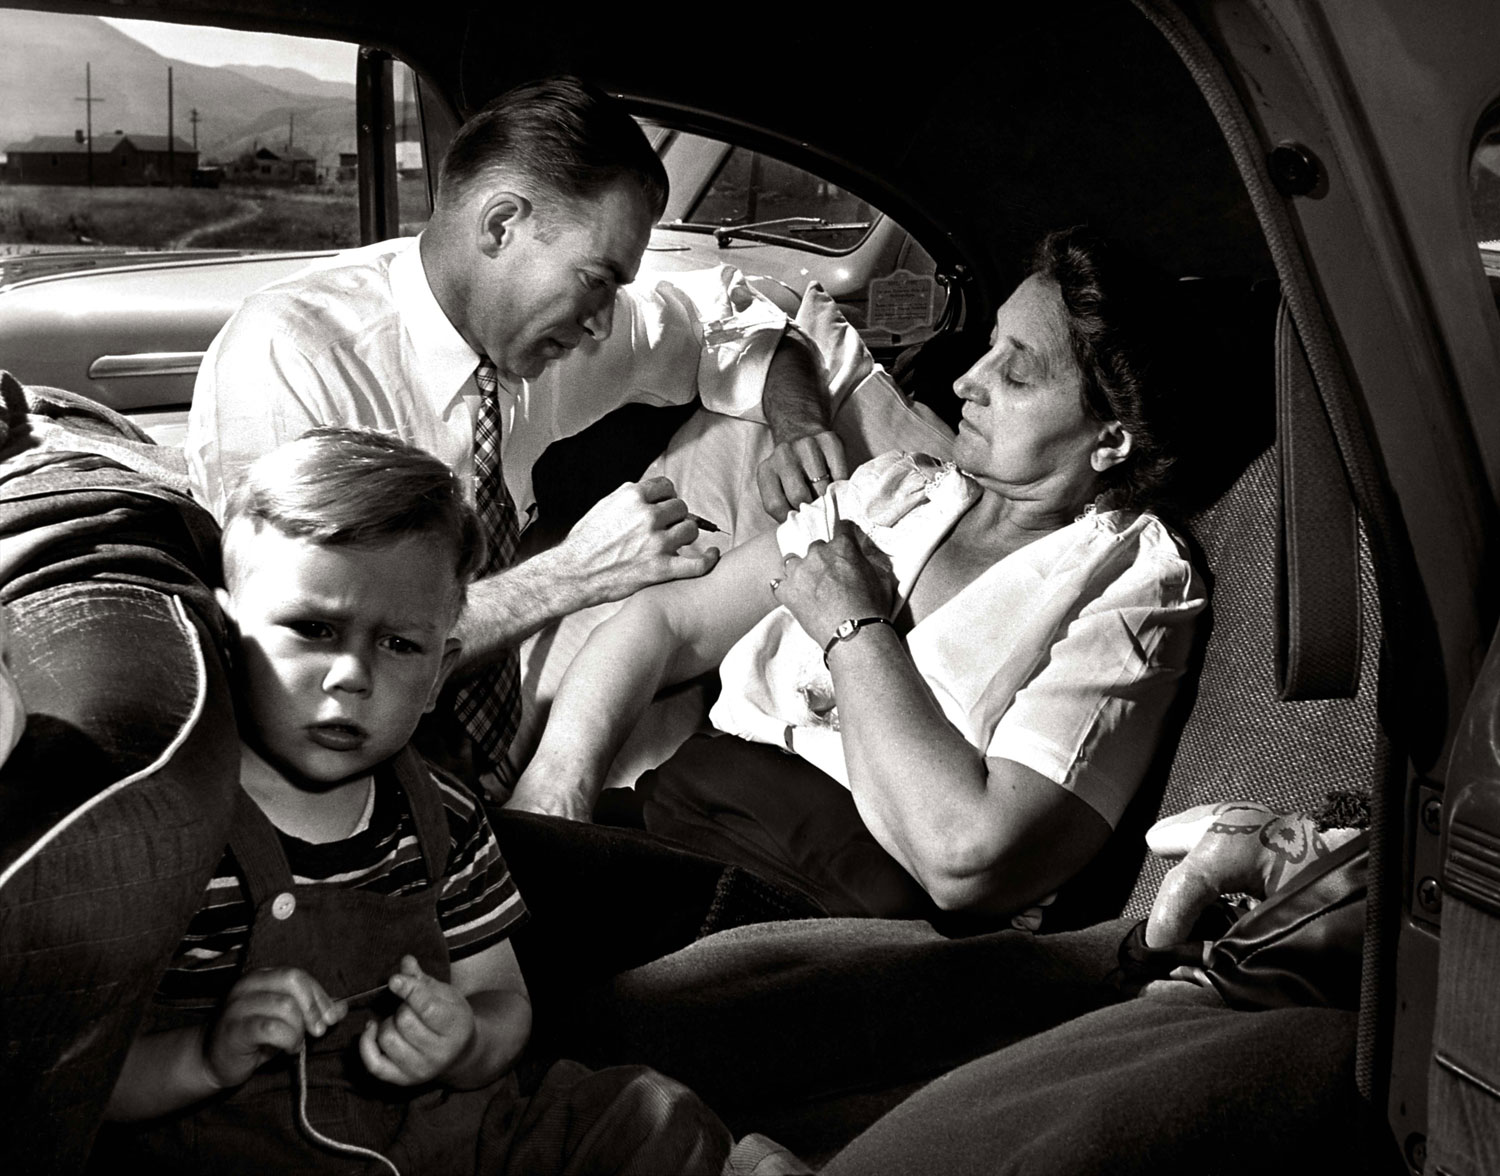 In the backseat of a car, Dr. Ceriani administers a shot of morphine to a 60-year-old tourist from Chicago, seen here with her grandson, who was suffering from a mild heart disturbance.